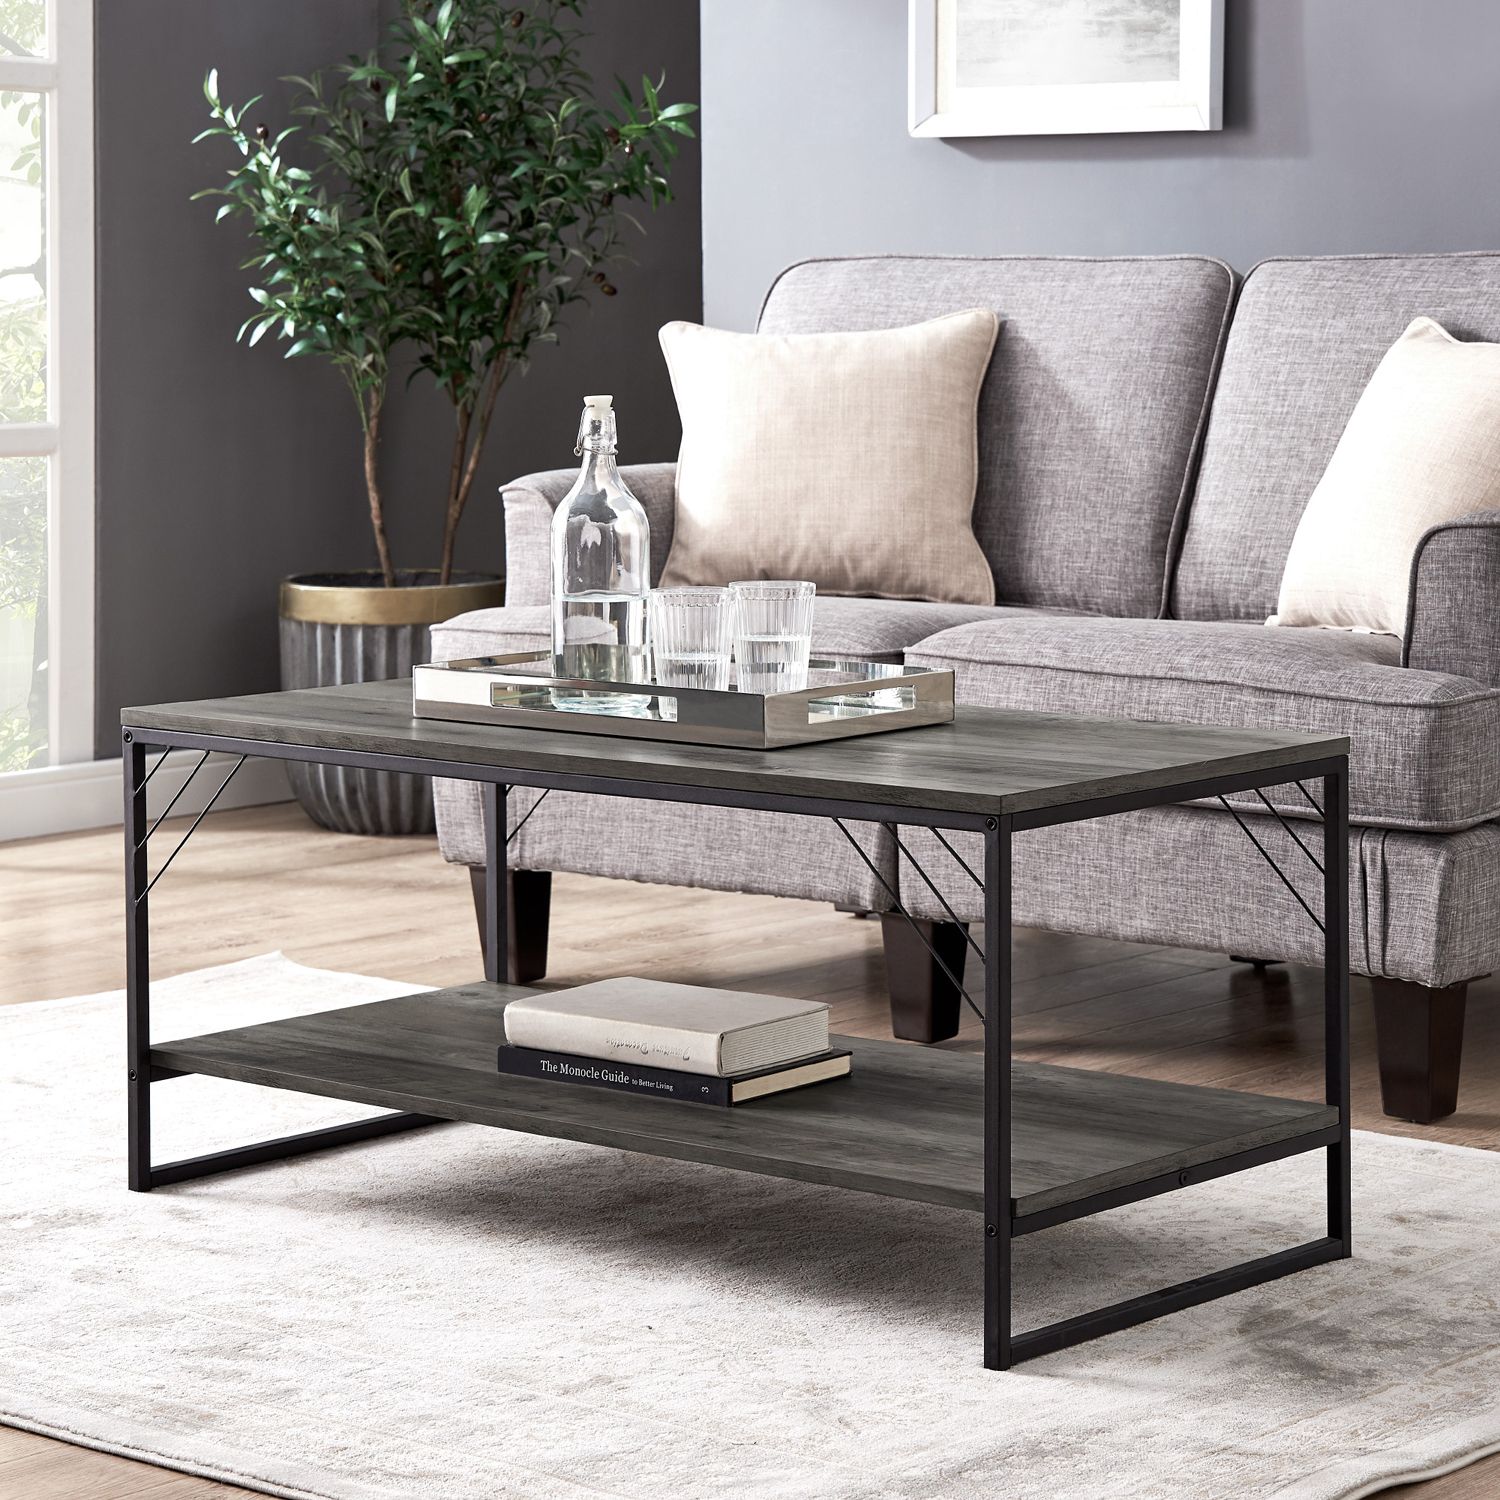 Industrial Metal Accent Gray Wash Coffee Table – Pier1 Imports Throughout Glossy Finished Metal Coffee Tables (View 15 of 20)